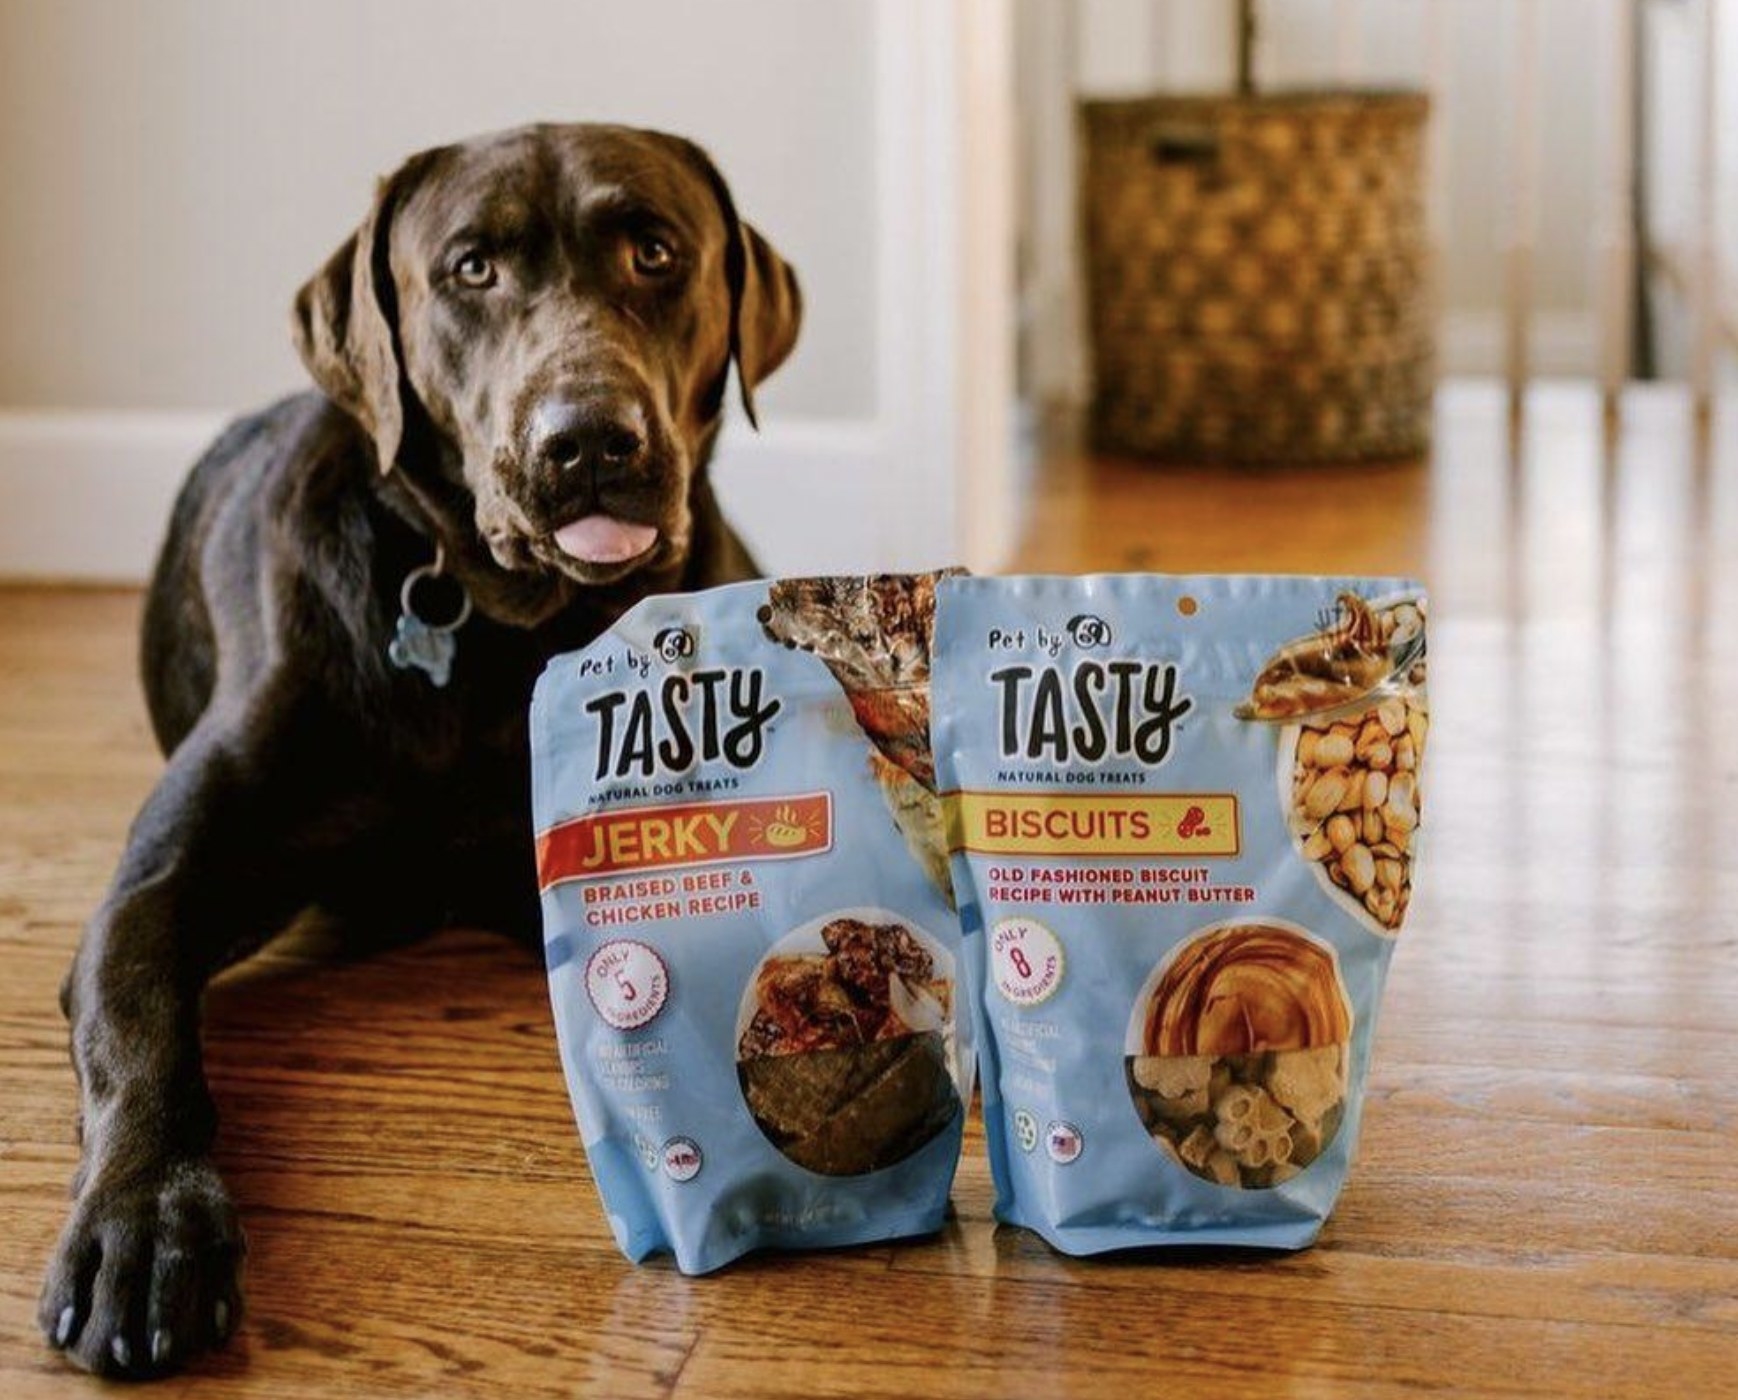 A chocolate lab sitting next to a bag of the jerky treats and peanut butter biscuits